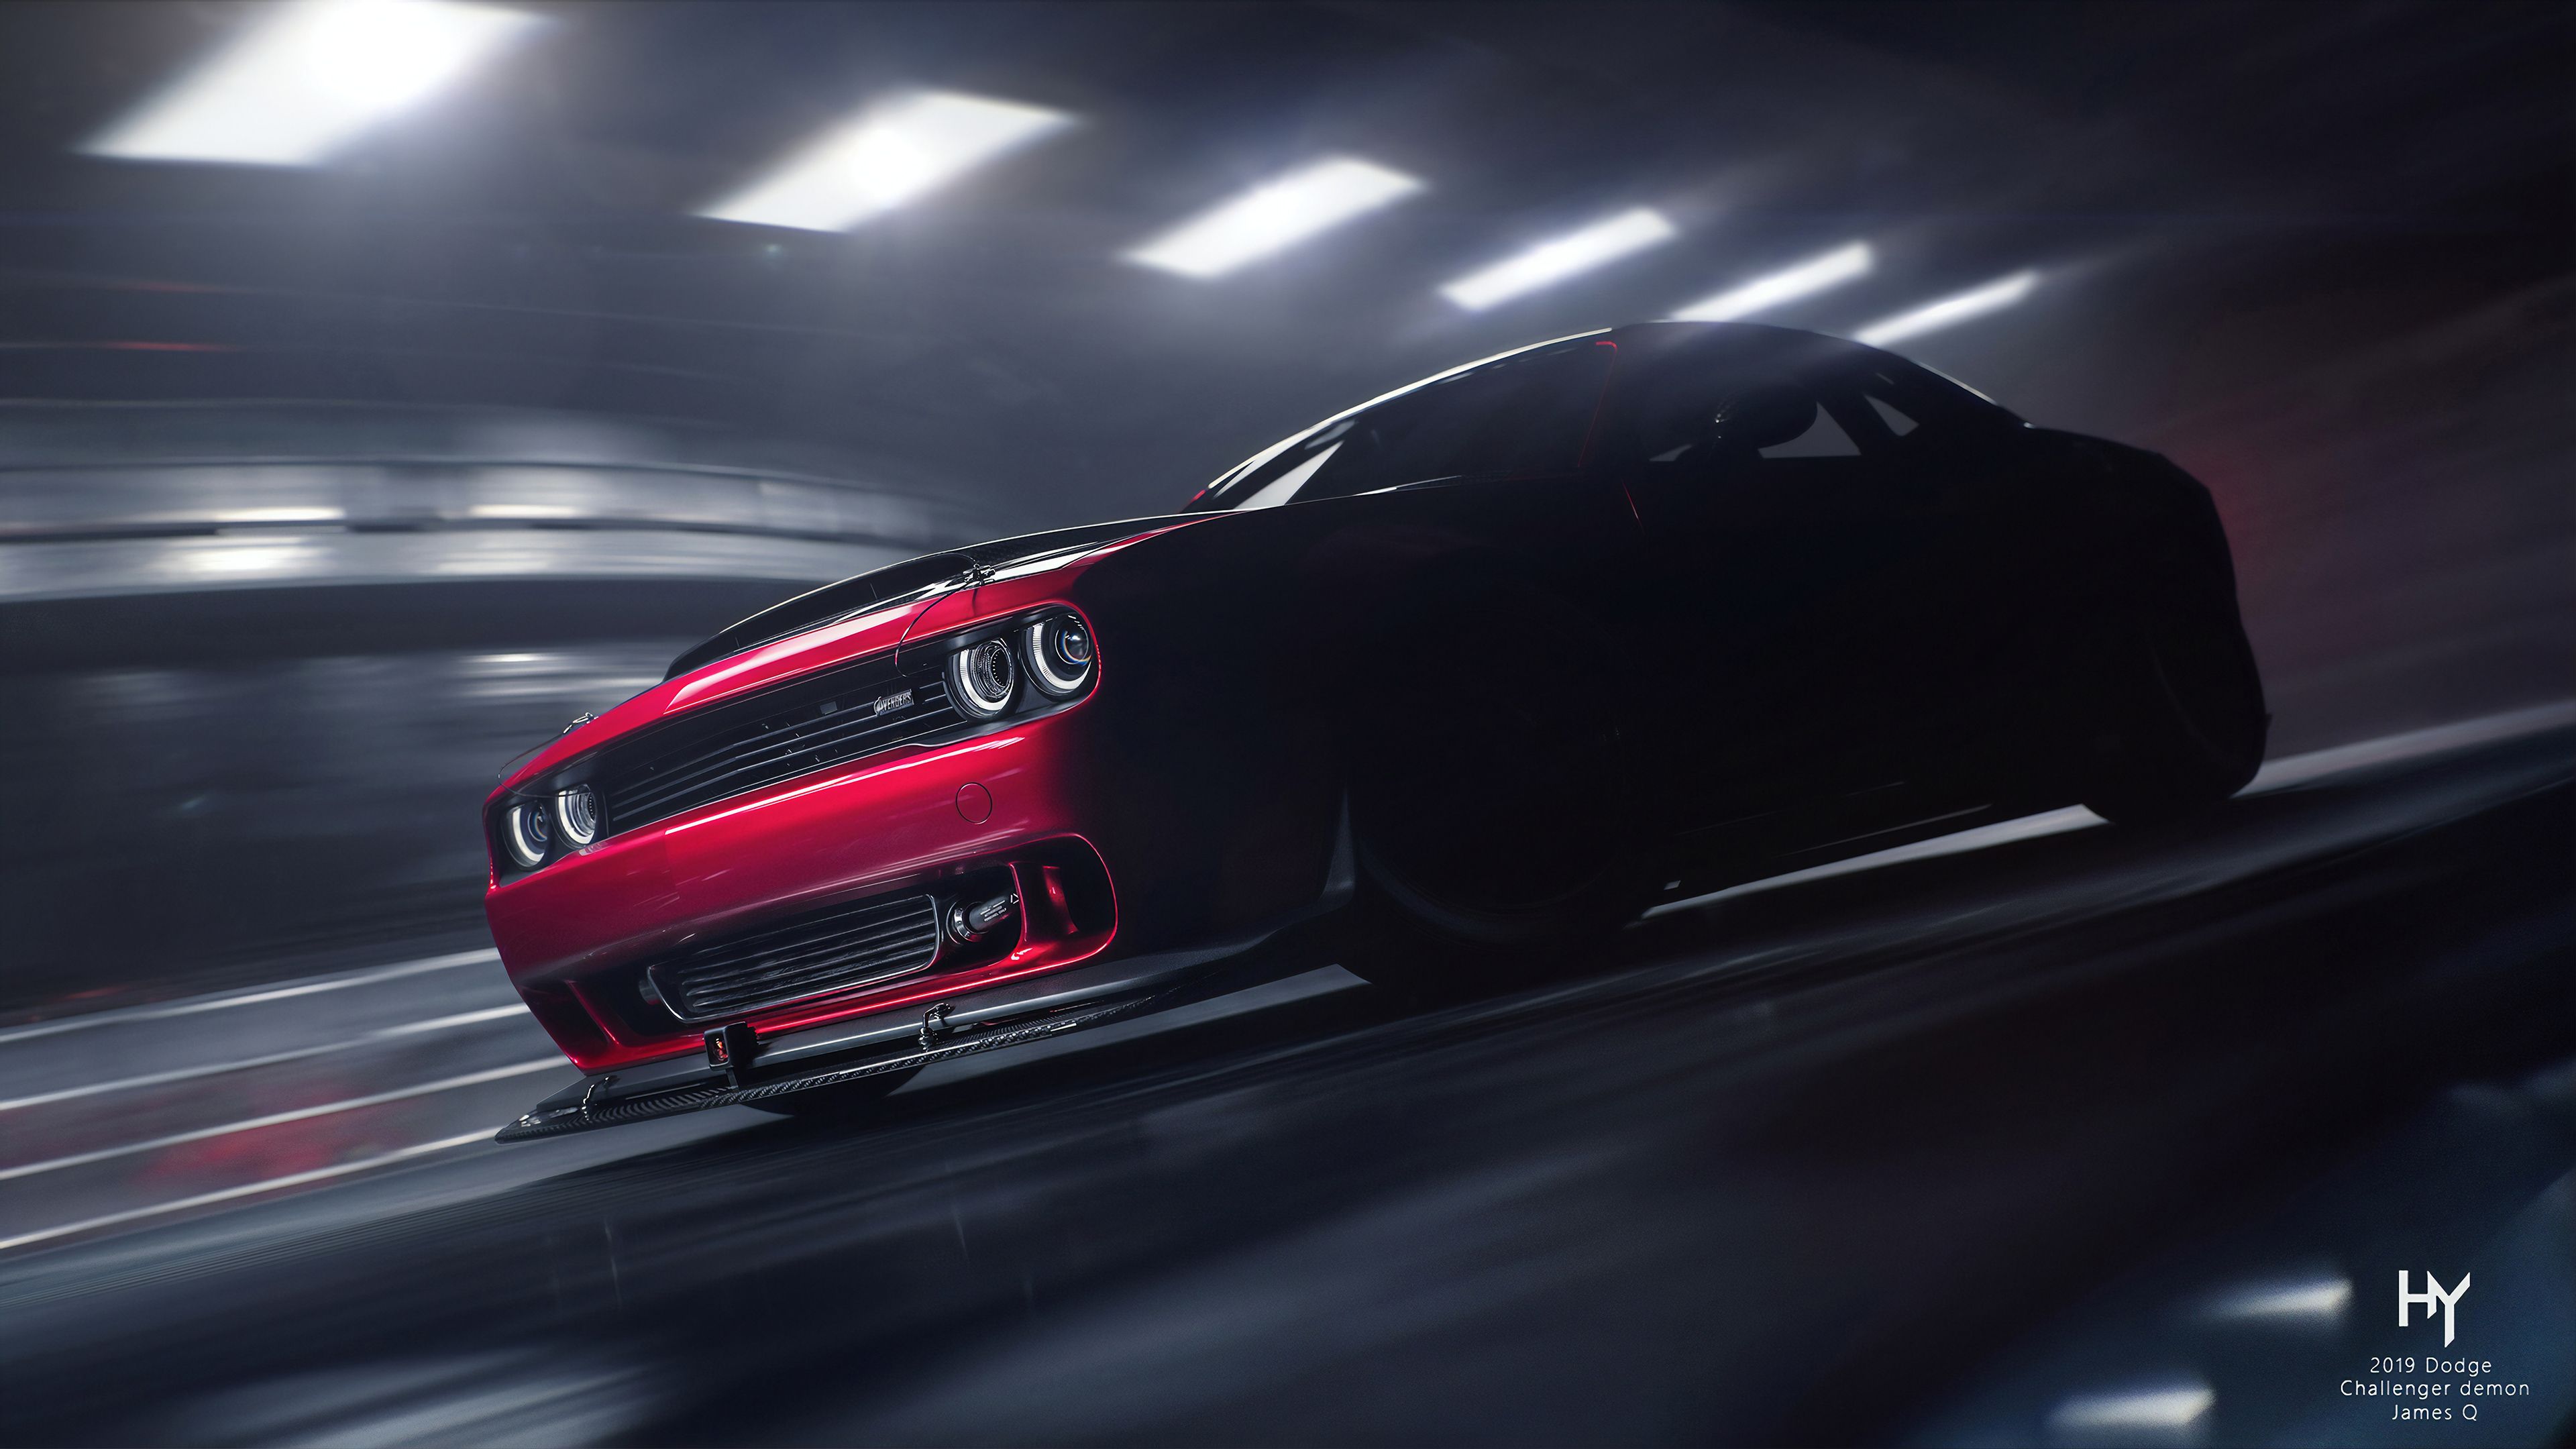 Dodge Challenger Demon, HD Cars, 4k Wallpaper, Image, Background, Photo and Picture